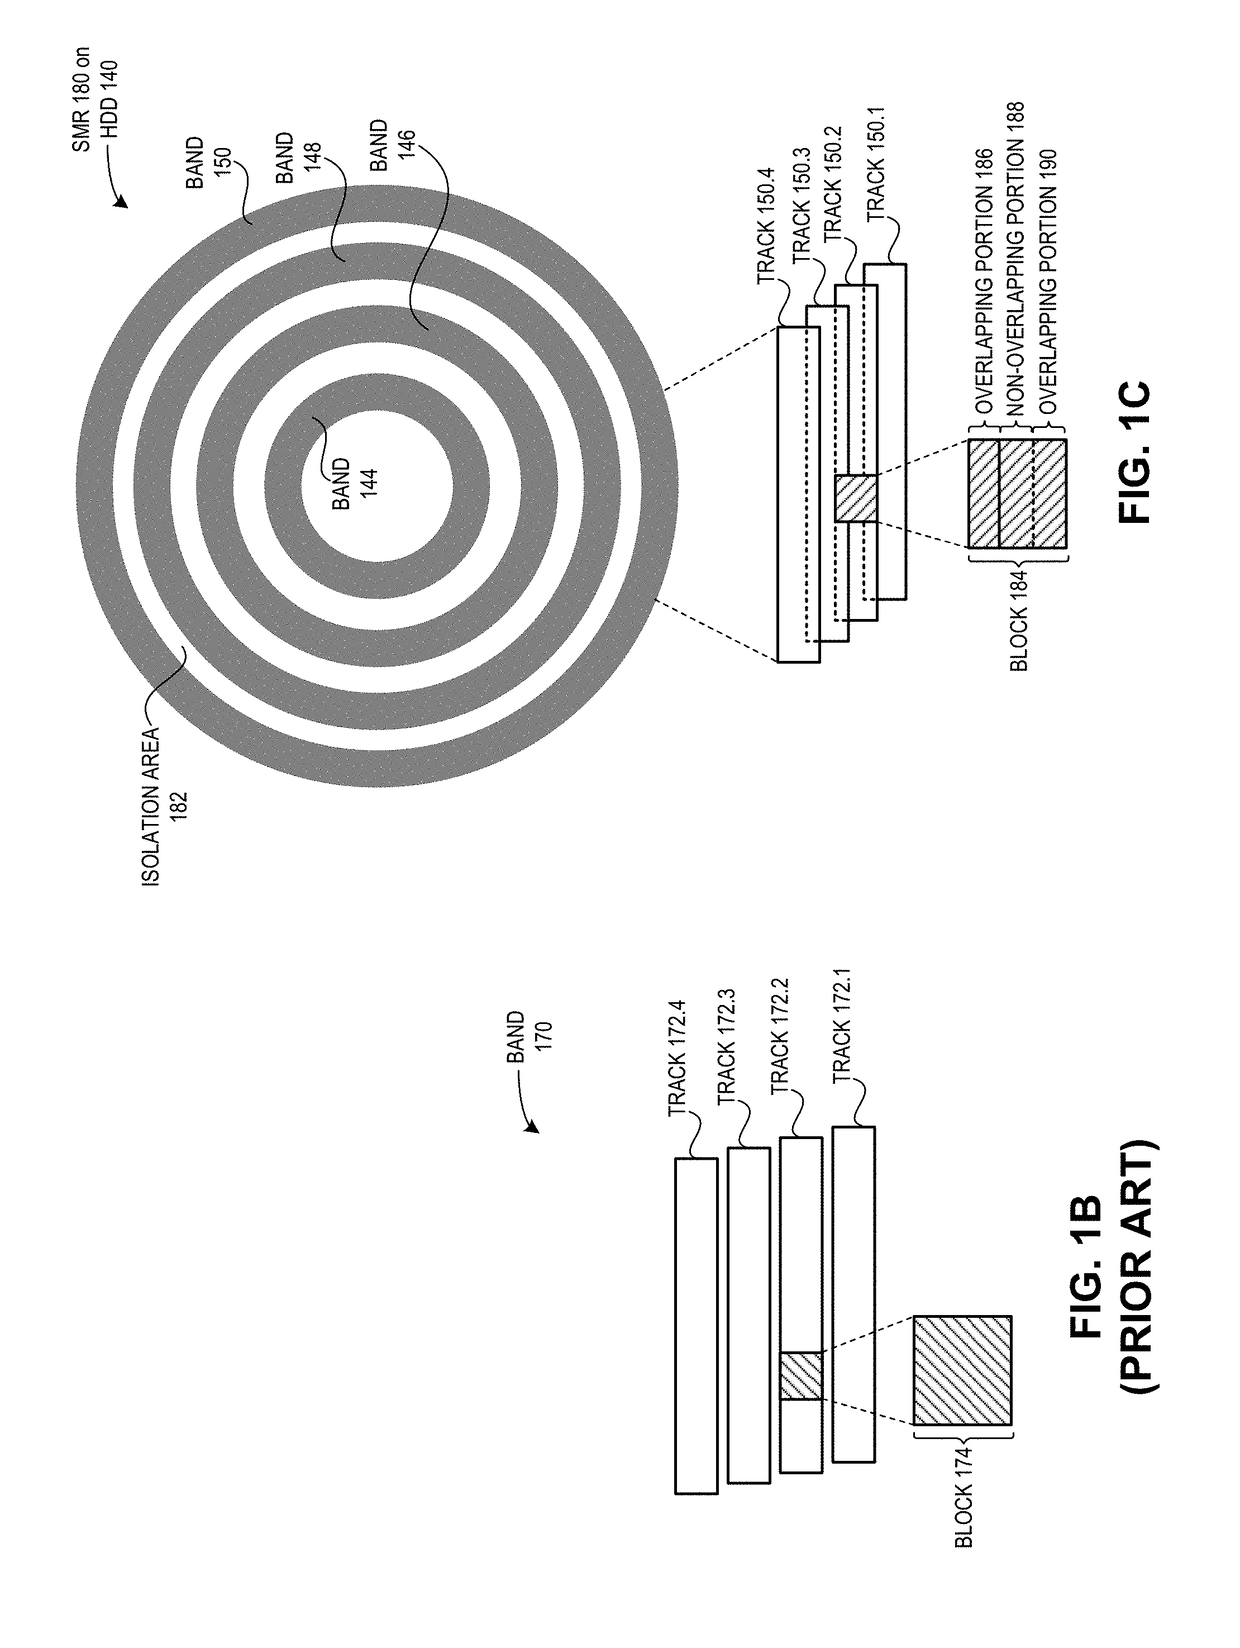 Method and system for rearranging a write operation in a shingled magnetic recording device